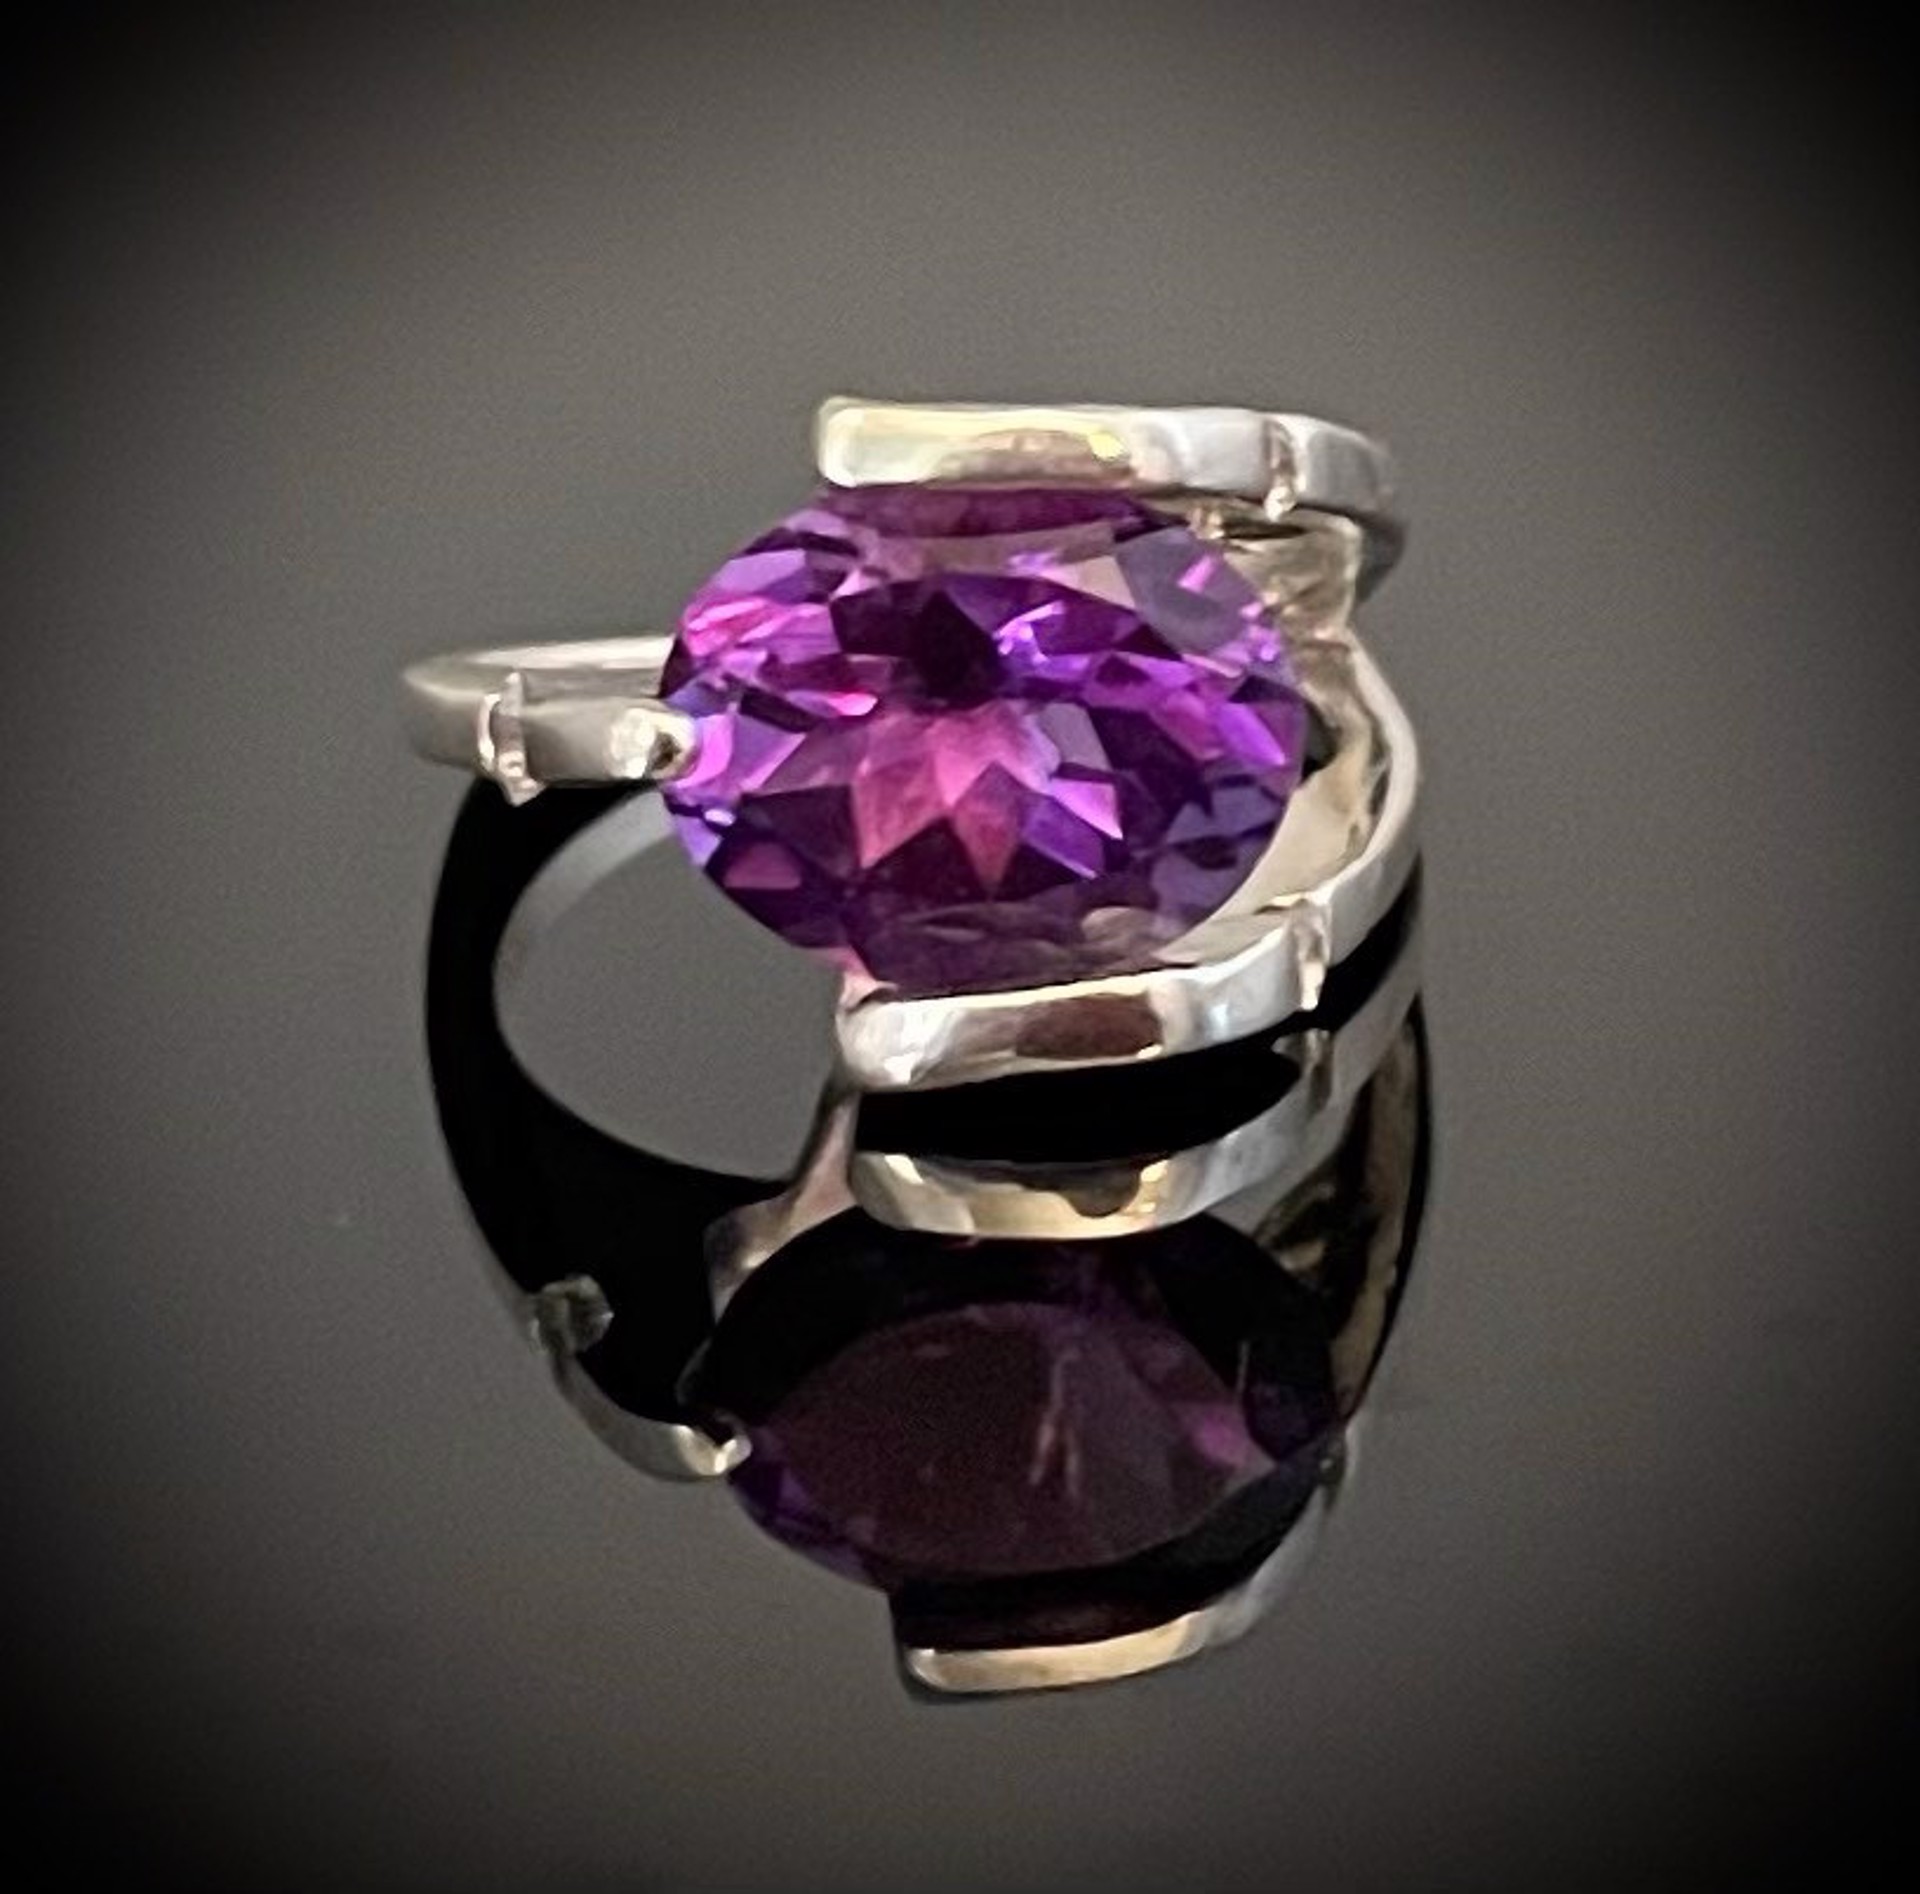 Starry Nights Ring - Amethyst and White Sapphire Stones by Celest Michelotti